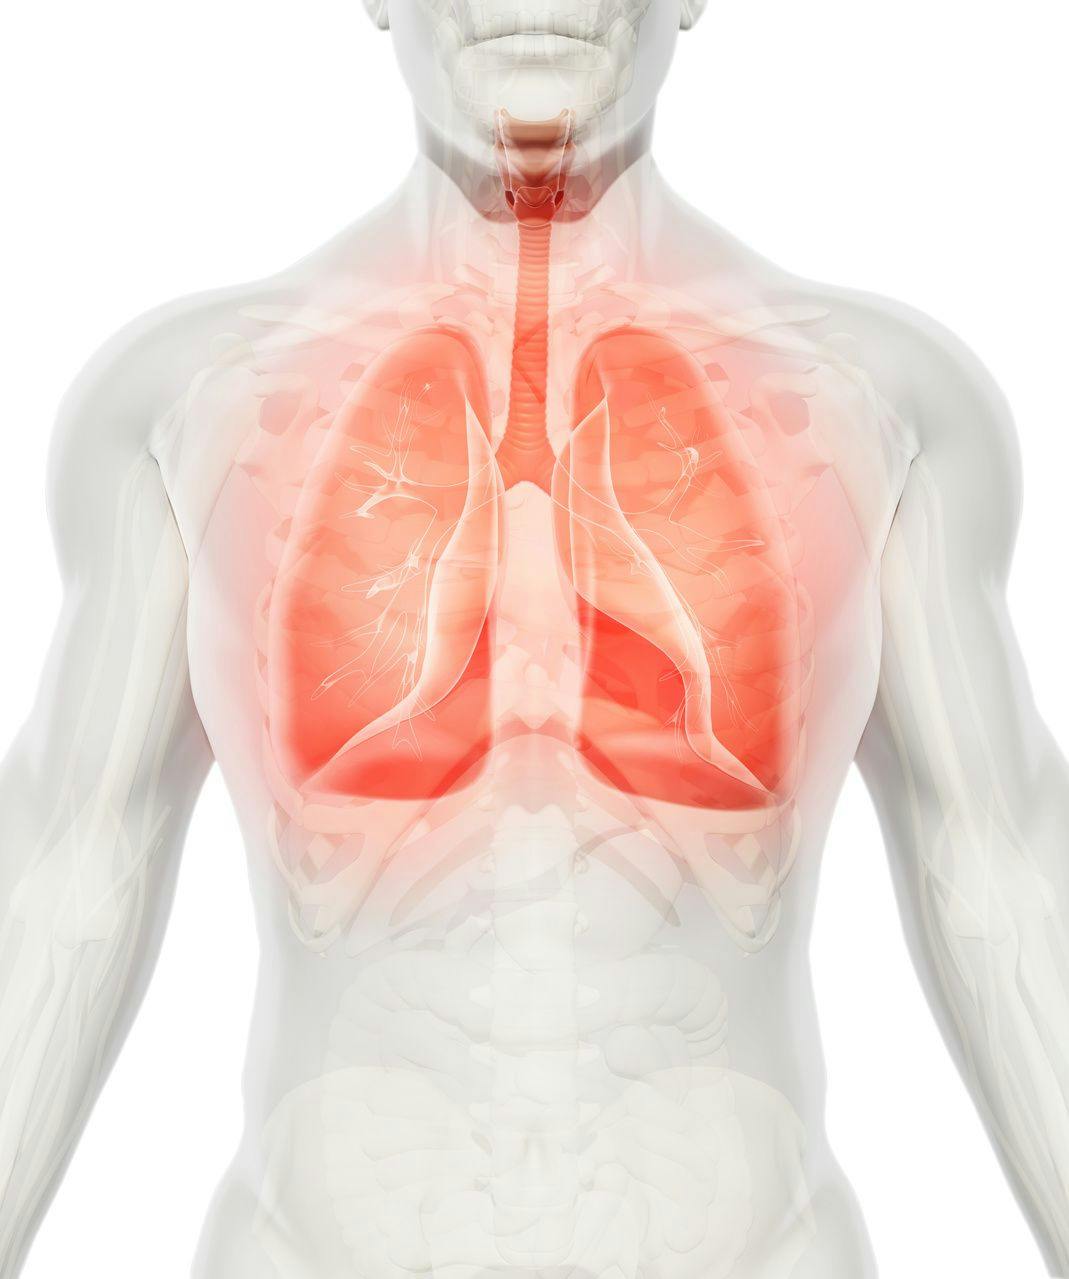 Knowledge About Effective Therapies for Interstitial Lung Disease Lacking, Review Says